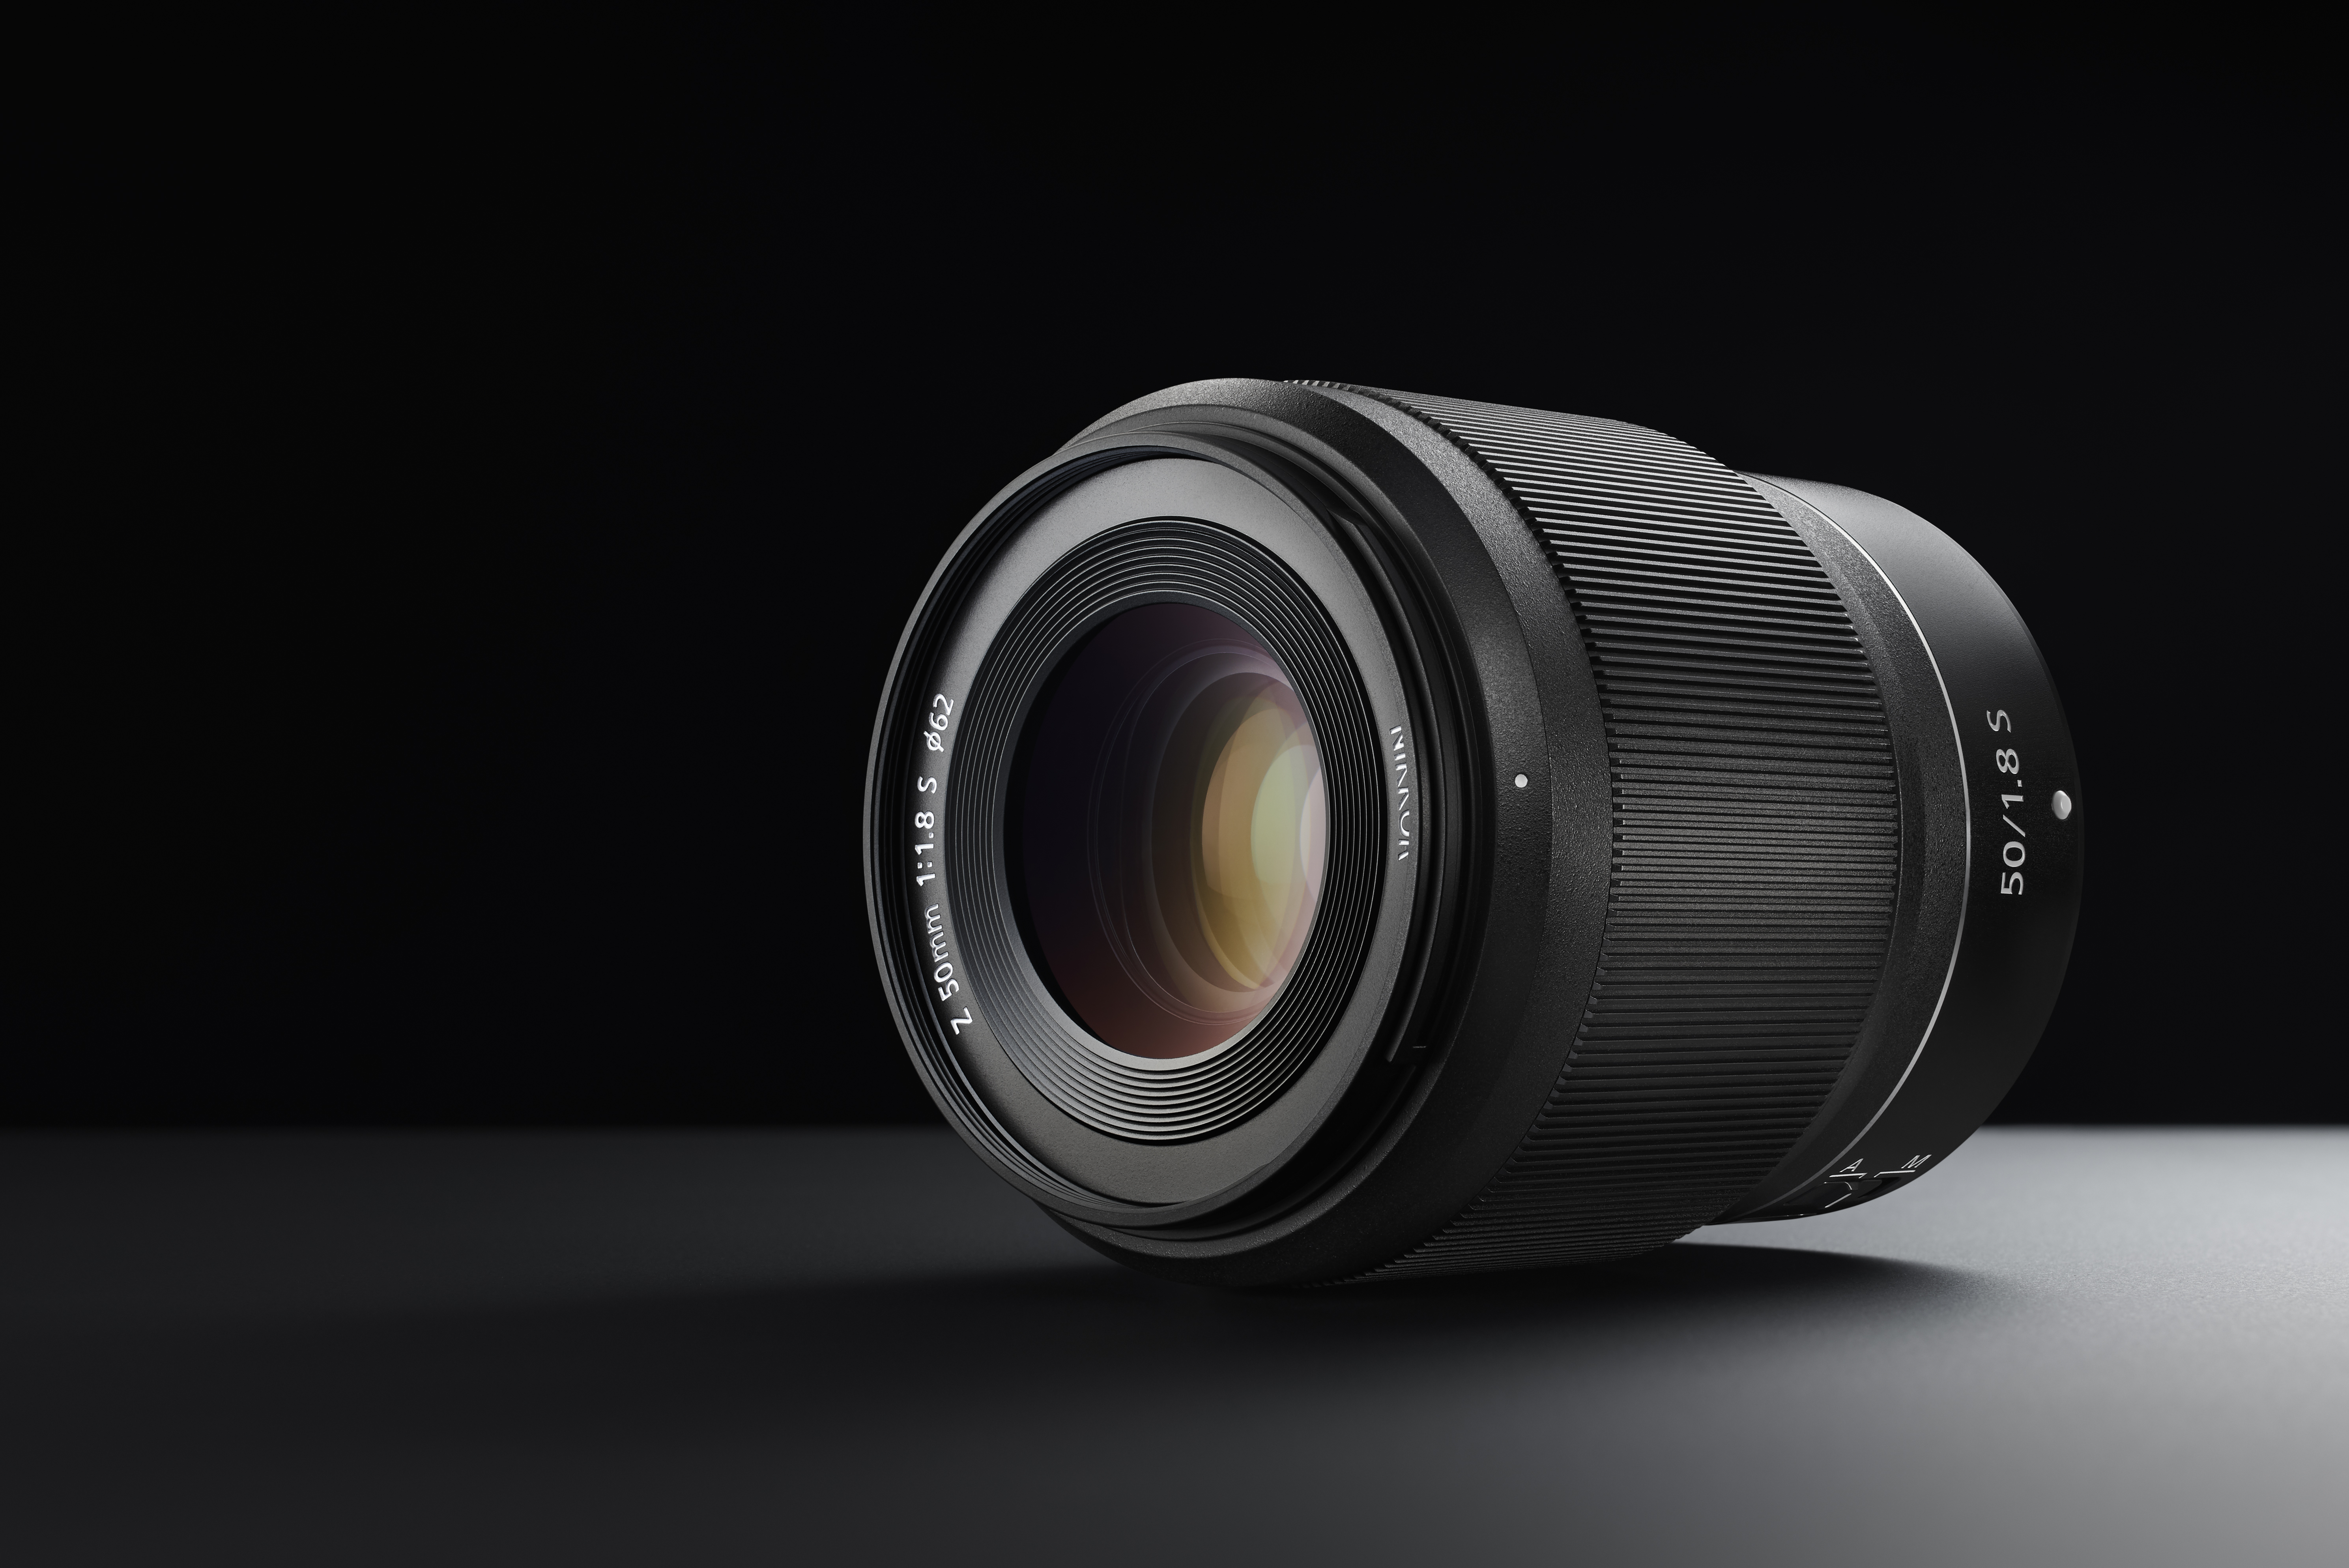 excel roll Ironic Nikkor Z 50mm f/1.8 S lens review | Digital Camera World